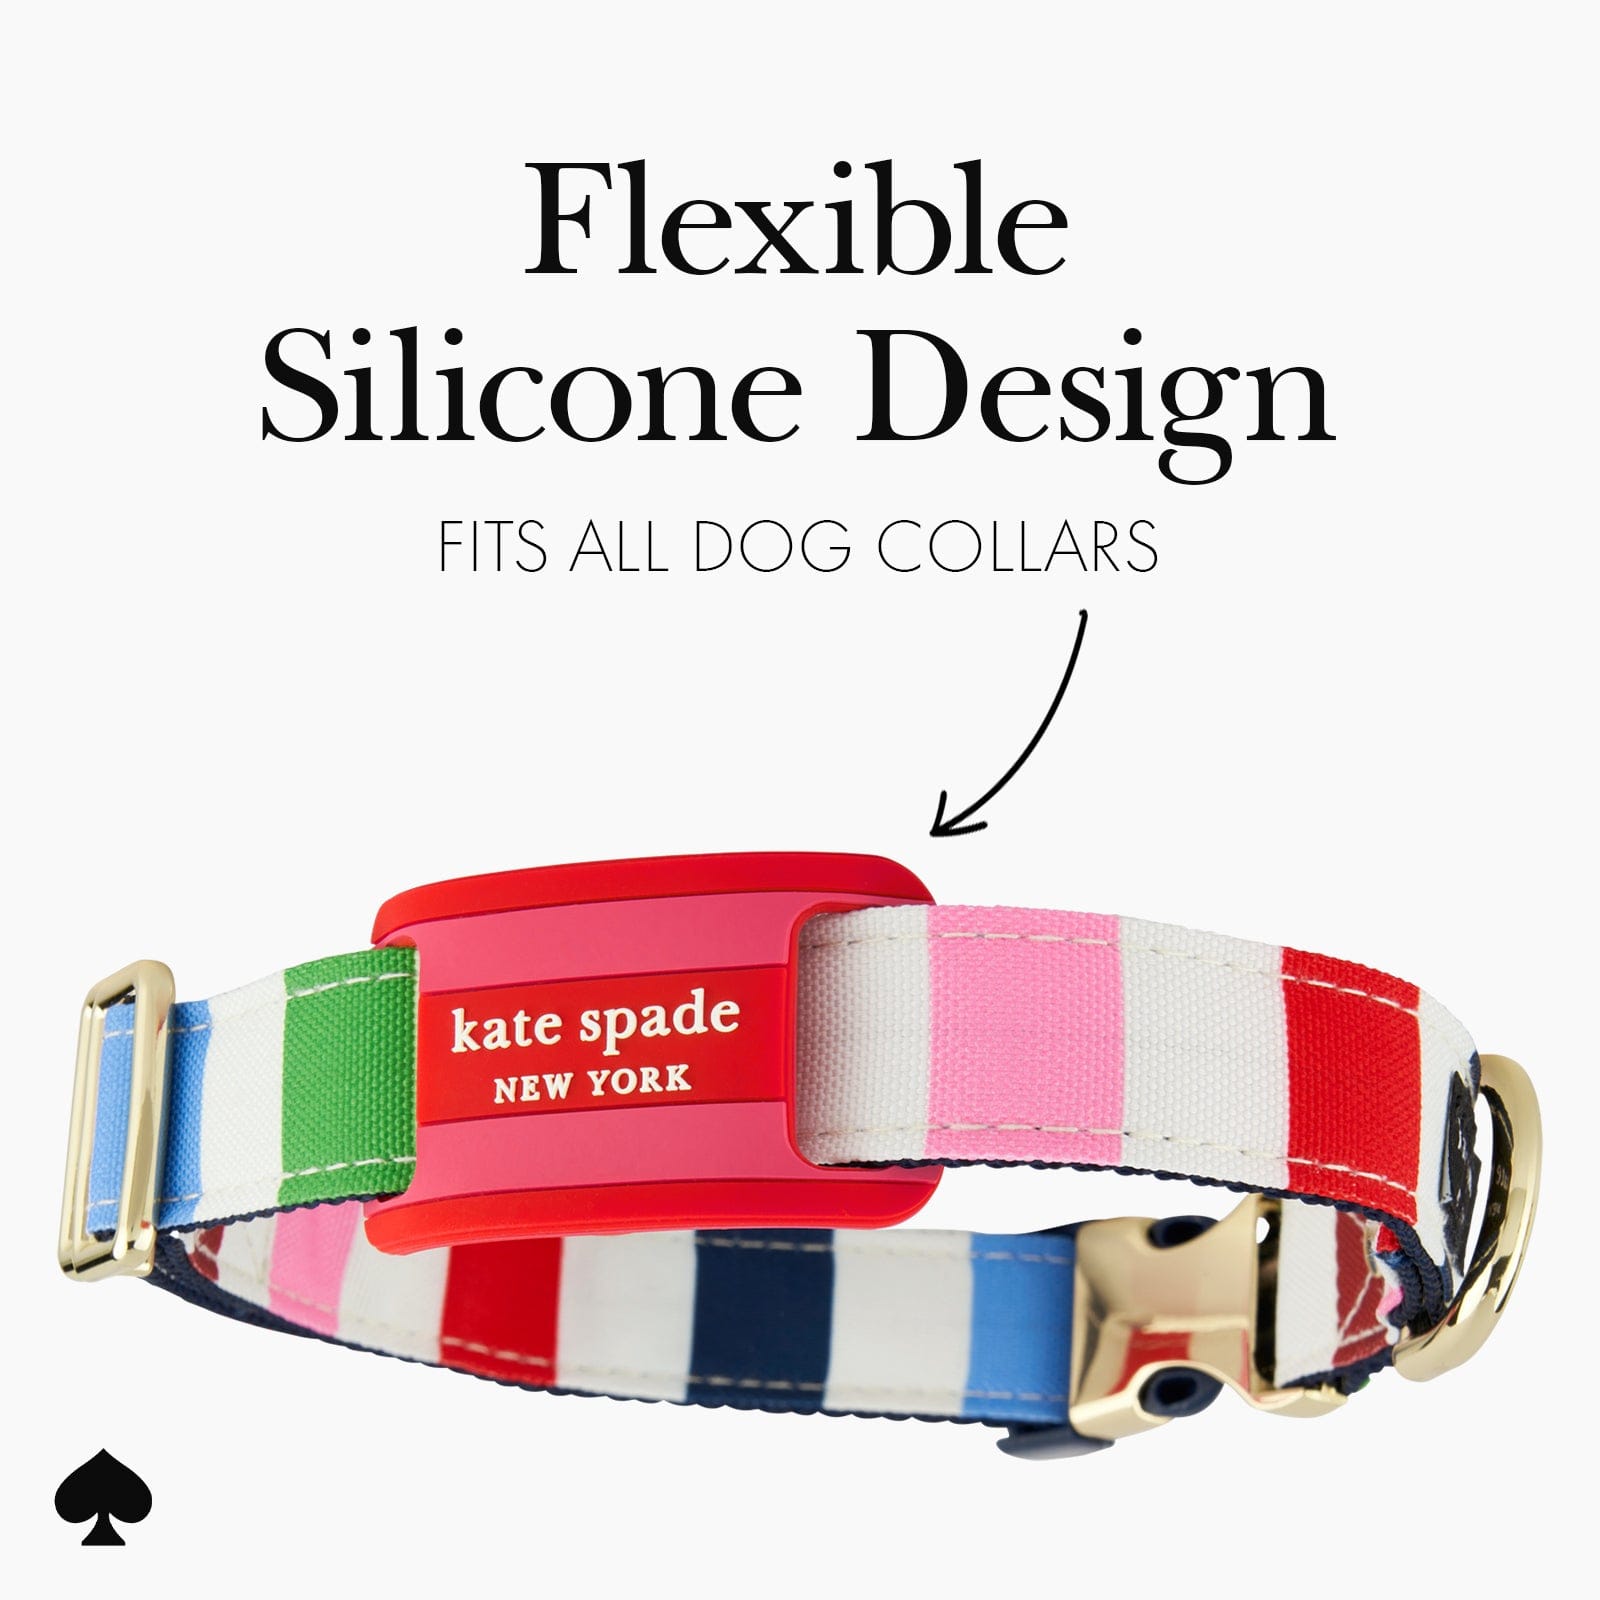 FLEXIBLE SILICONE DESIGN FITS ALL DOG COLLARS